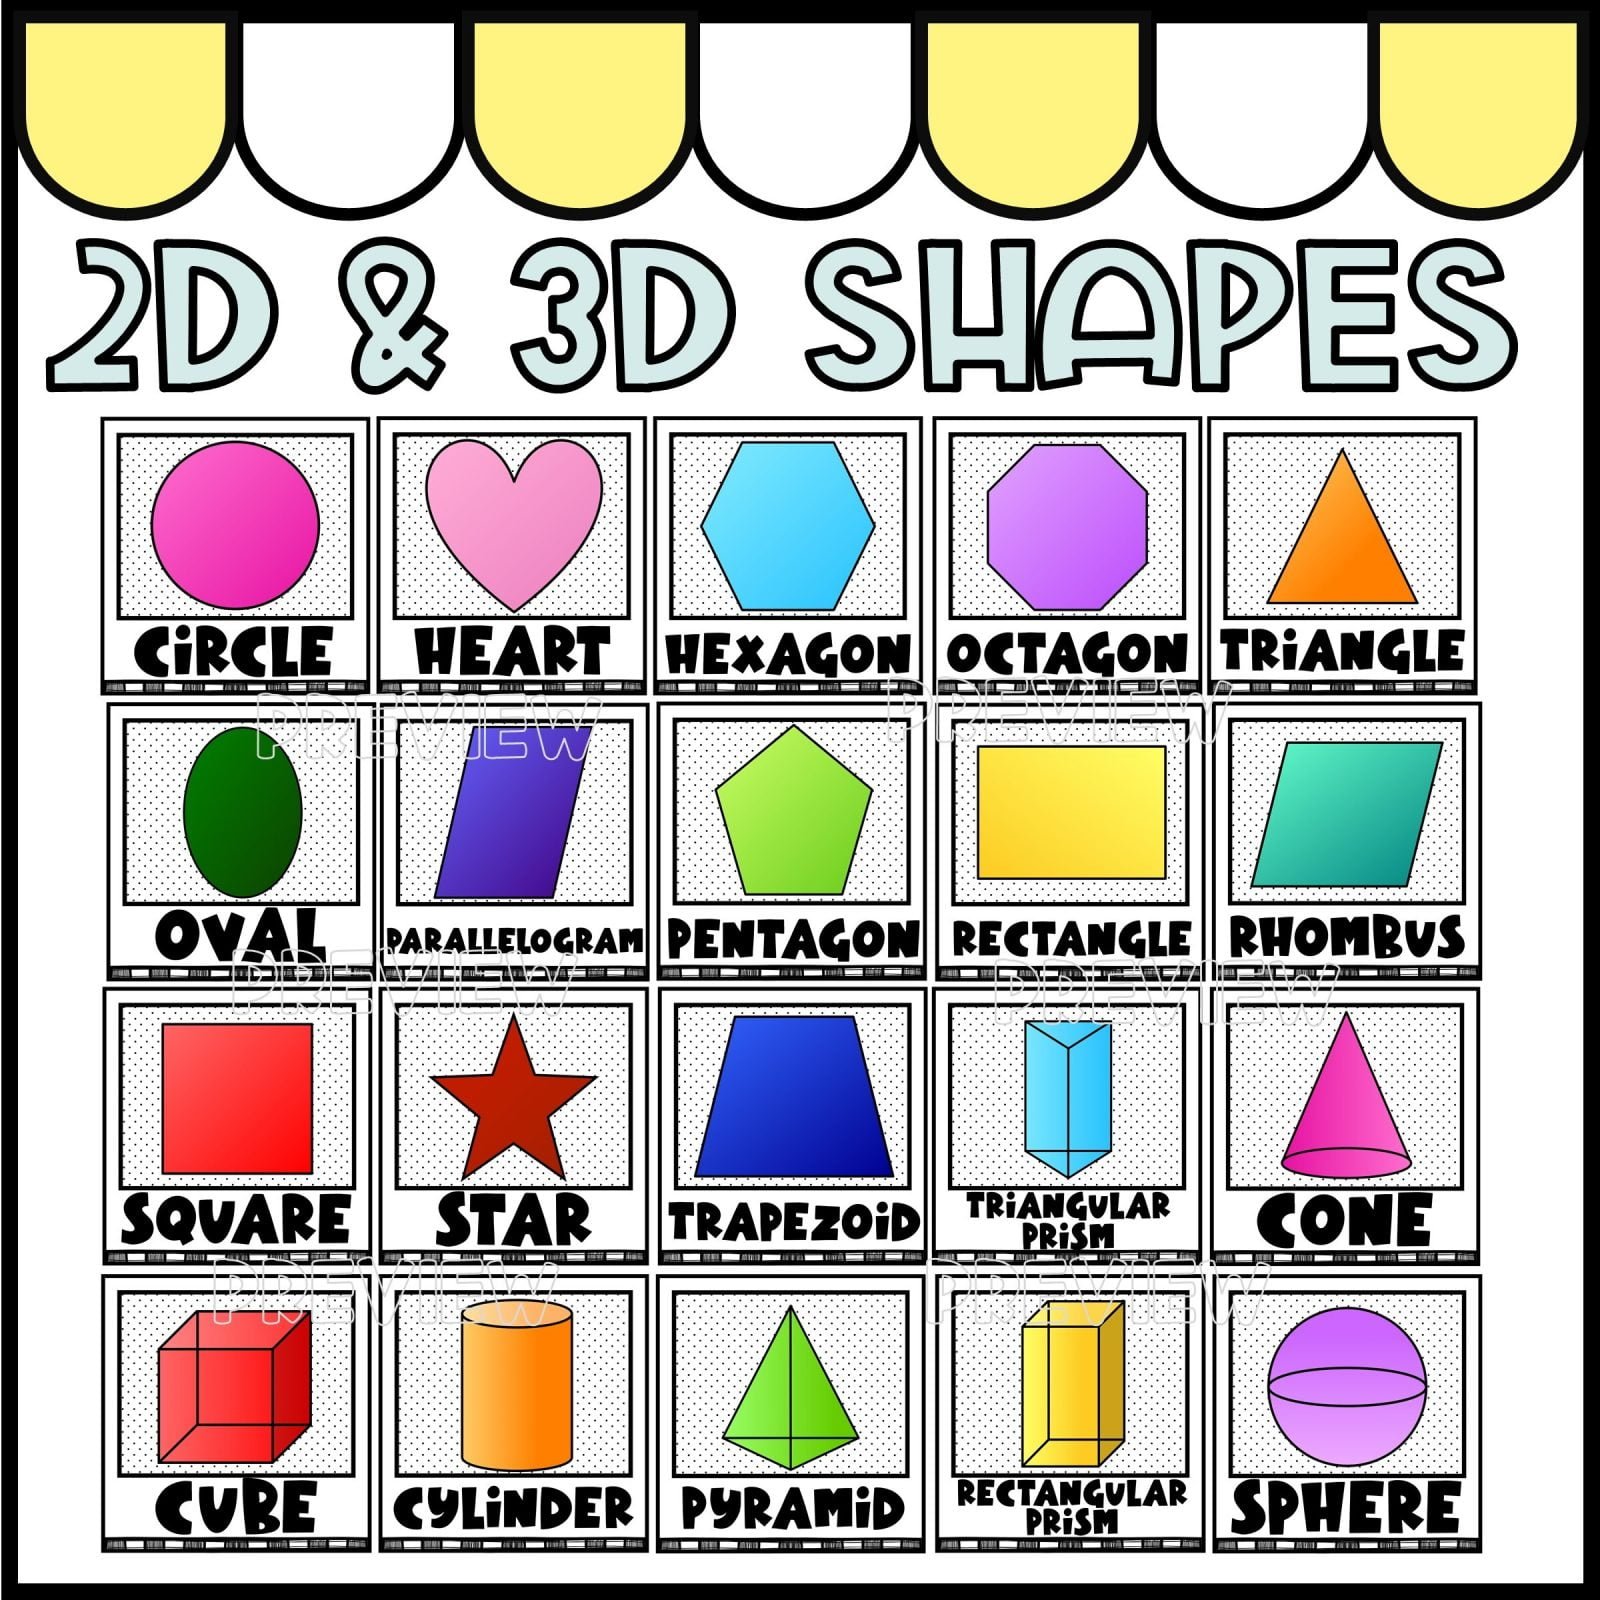 What Is The Relationship Between 2d And 3d Shapes